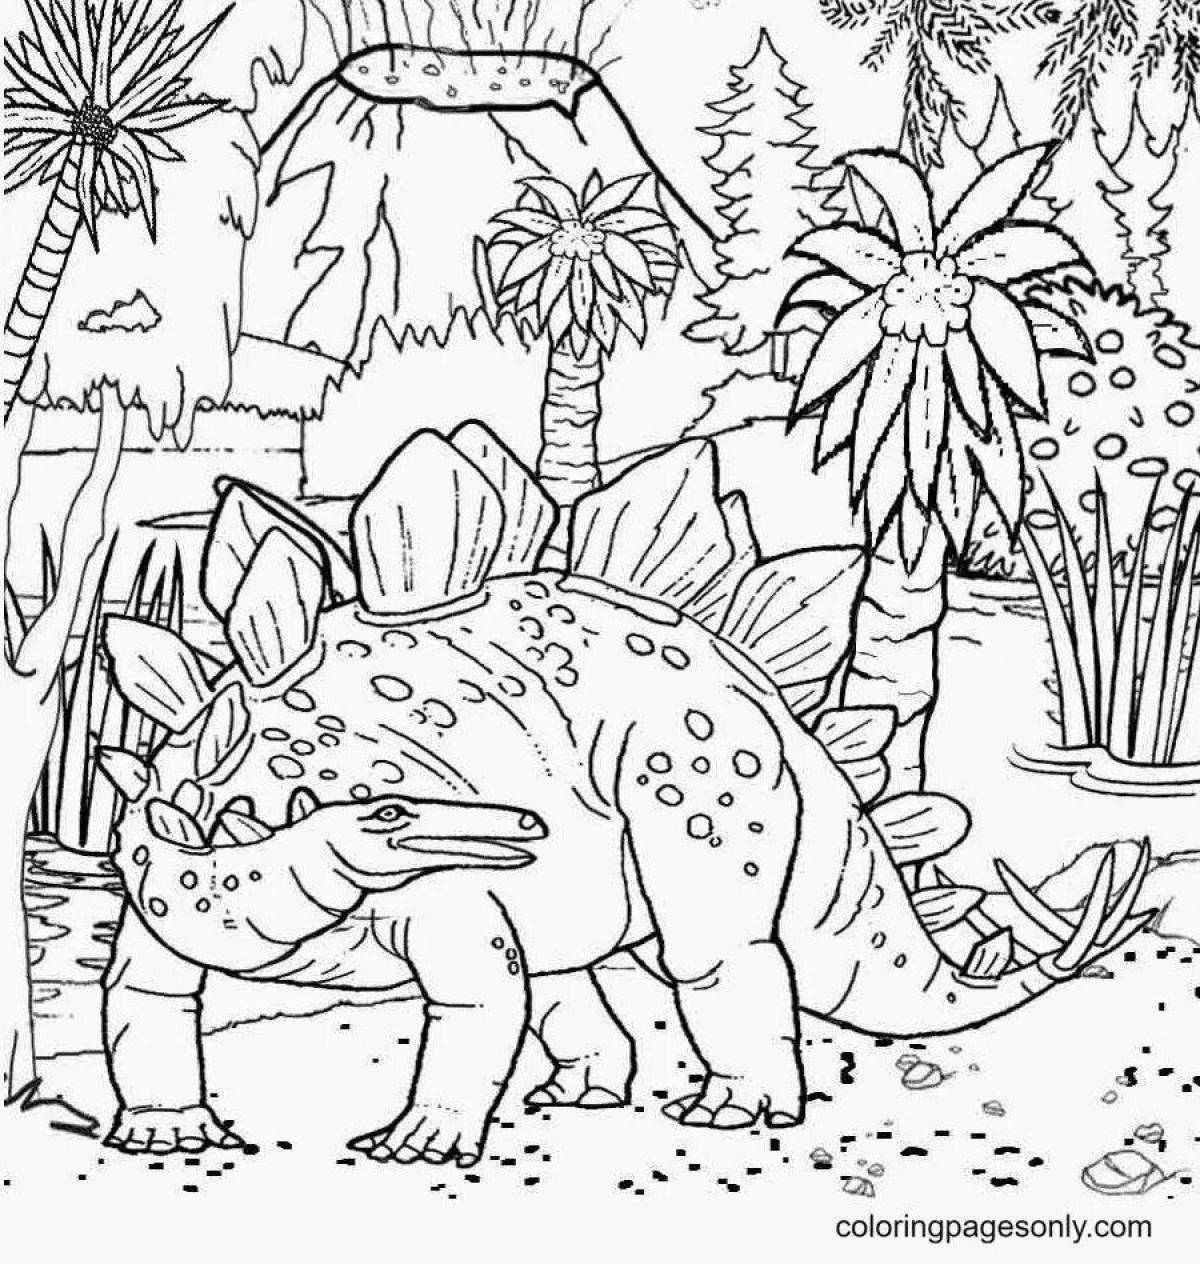 Awesome dinosaur coloring pages for 6-7 year old boys